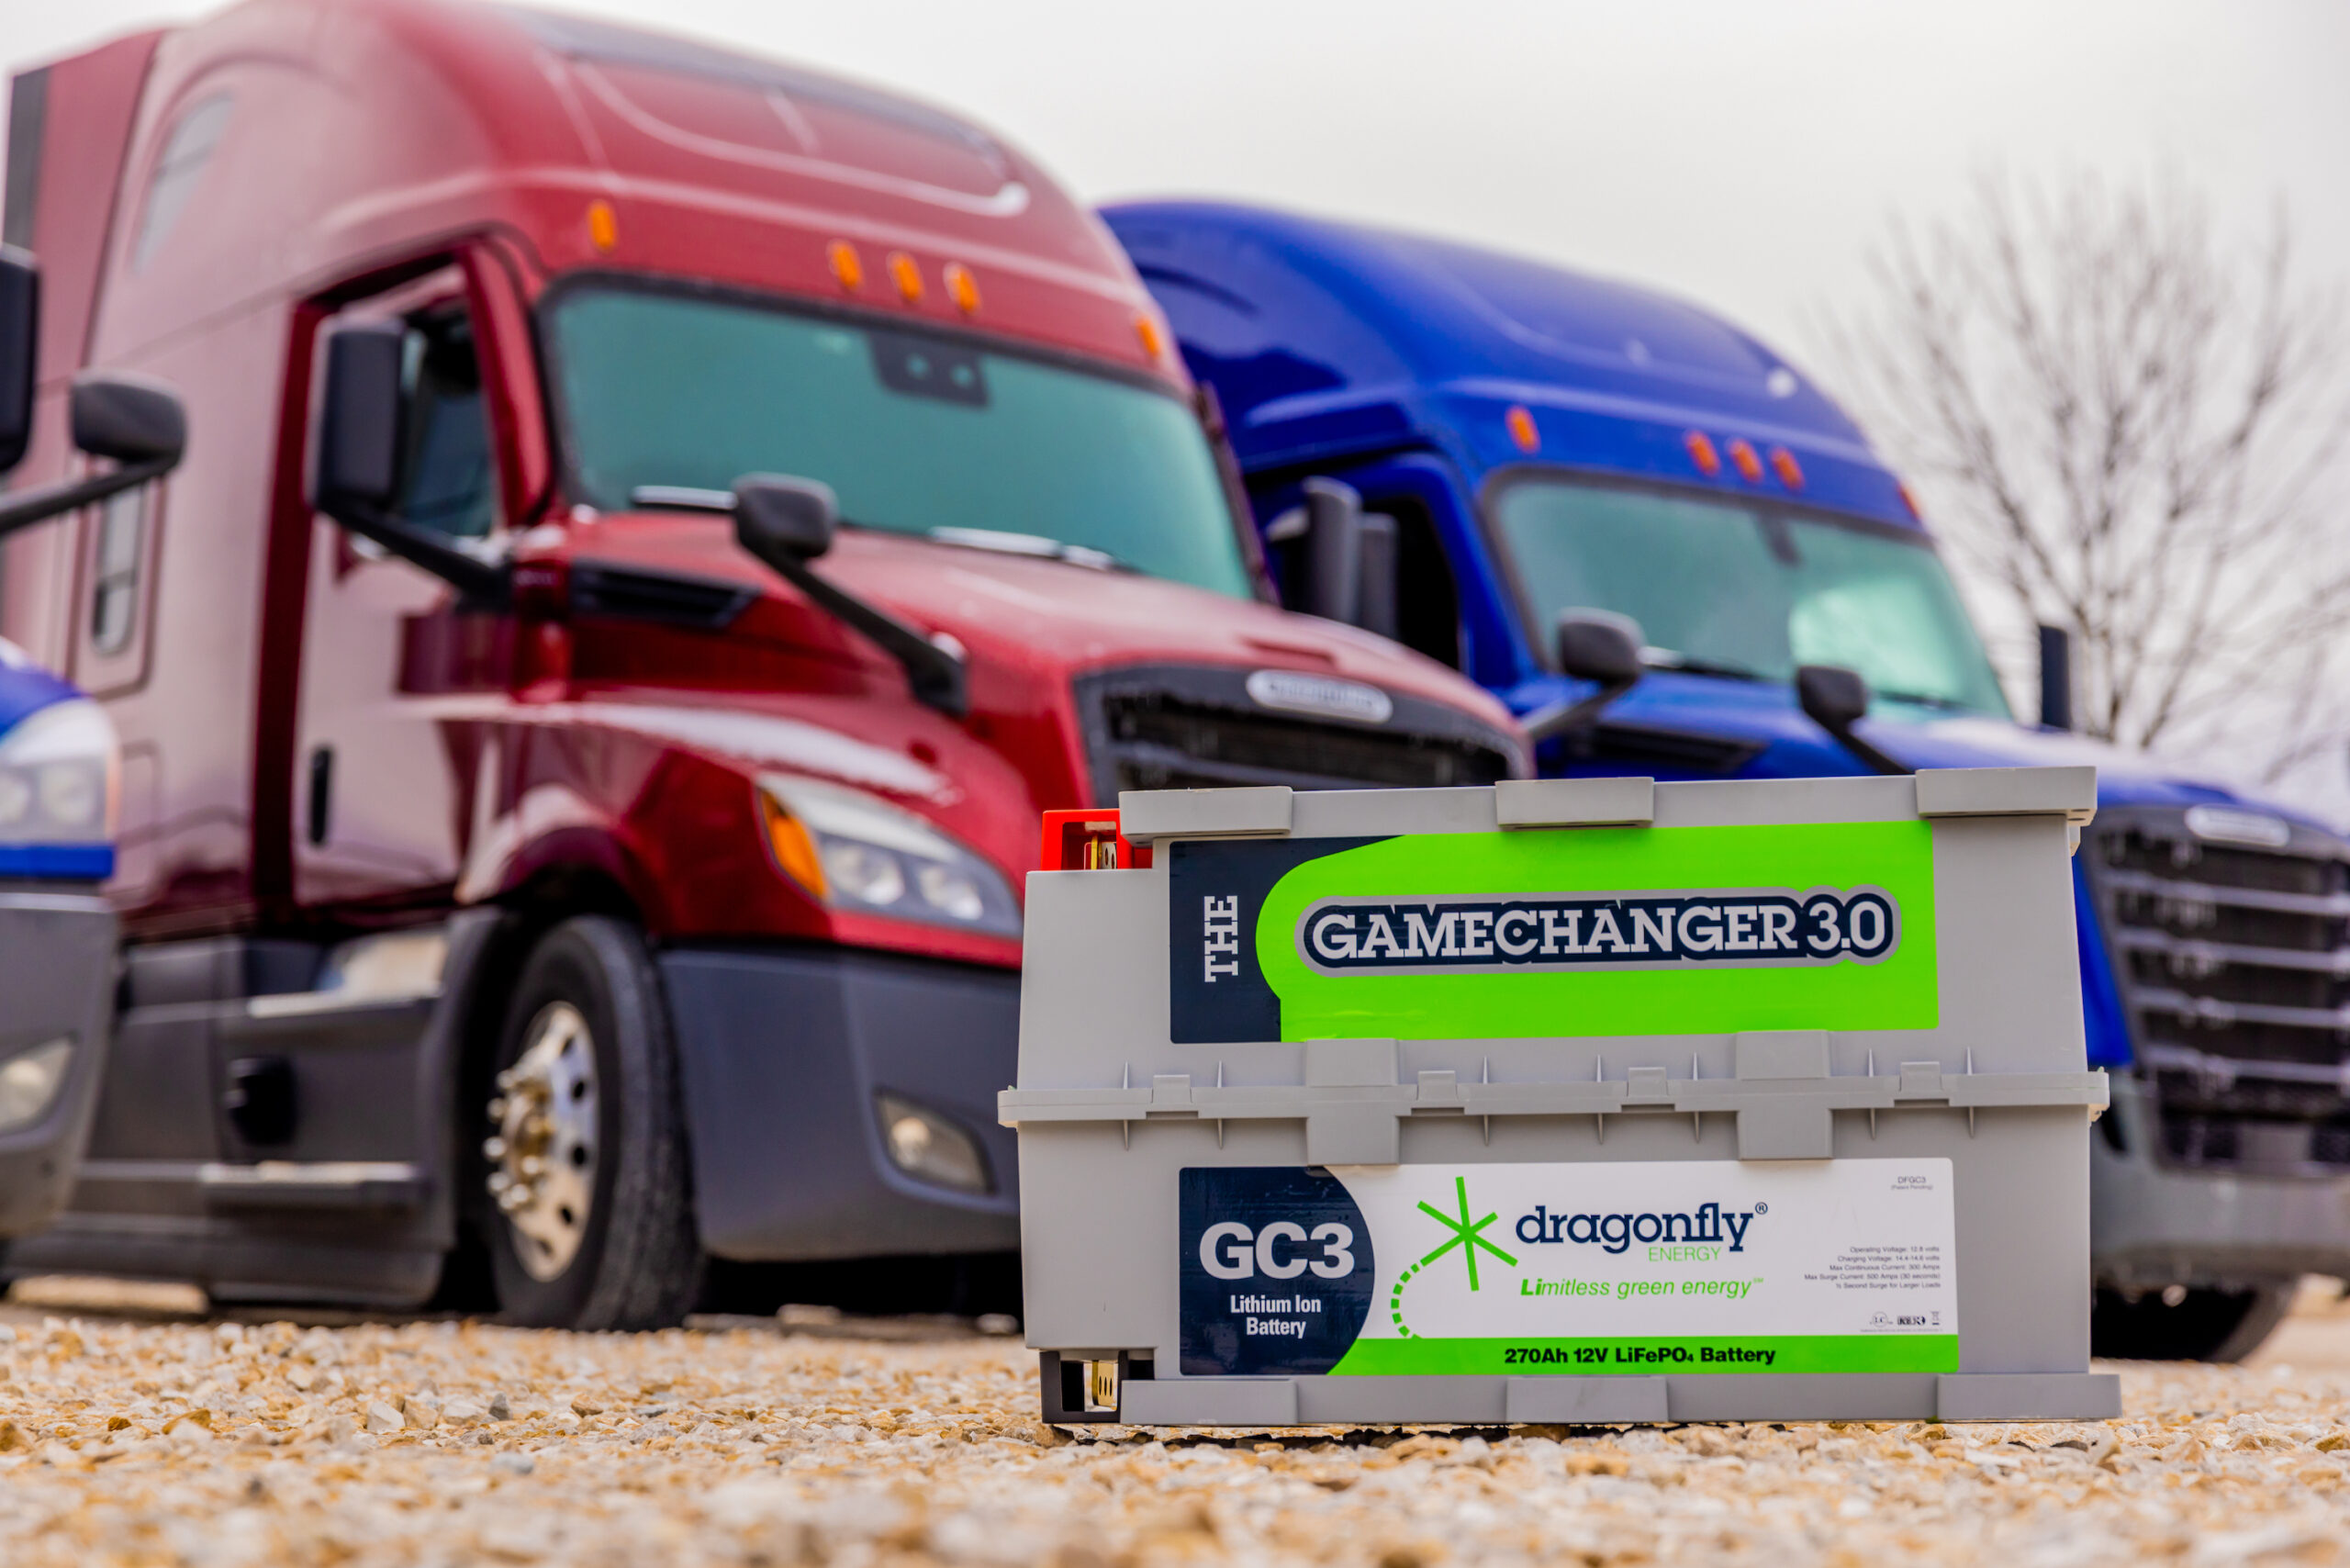 Dragonfly Energy's Gamechanger battery is a great option for long-haul trucking APUs.